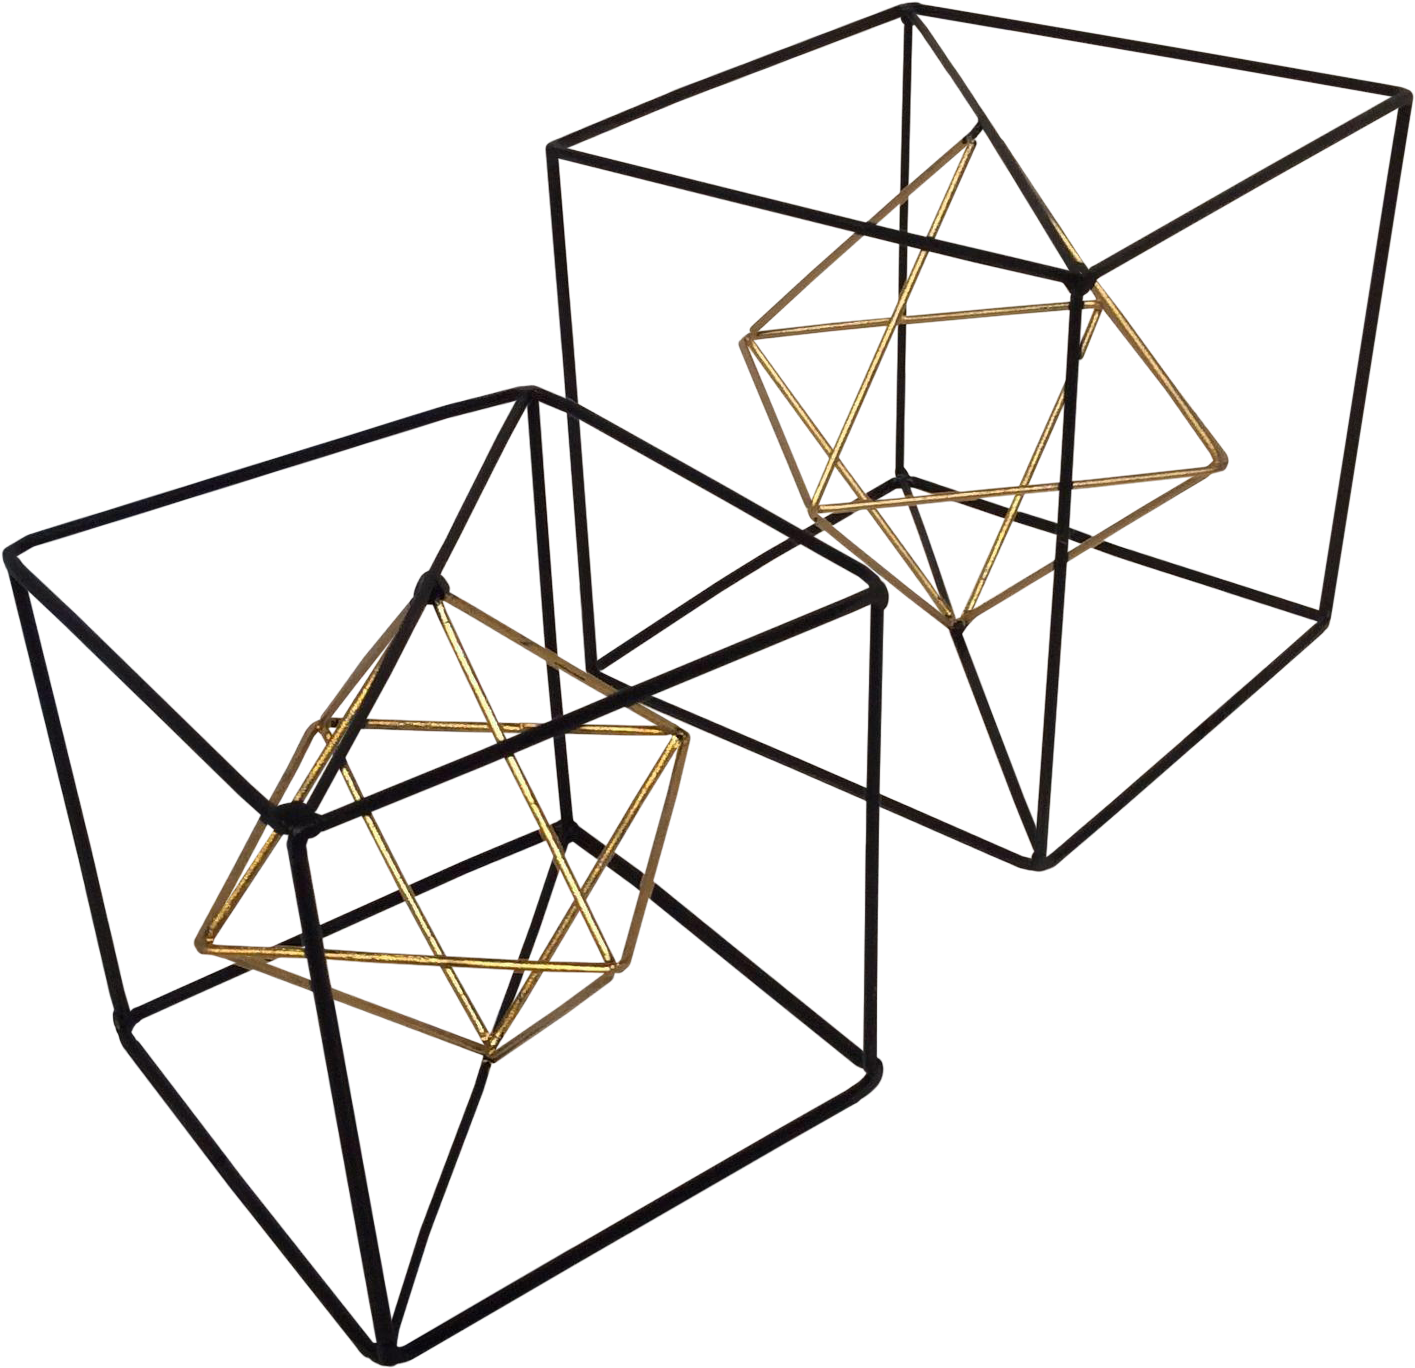 Picture Transparent Stock Geometric Cubes A Pair Chairish - Picture Transparent Stock Geometric Cubes A Pair Chairish (1571x1519)